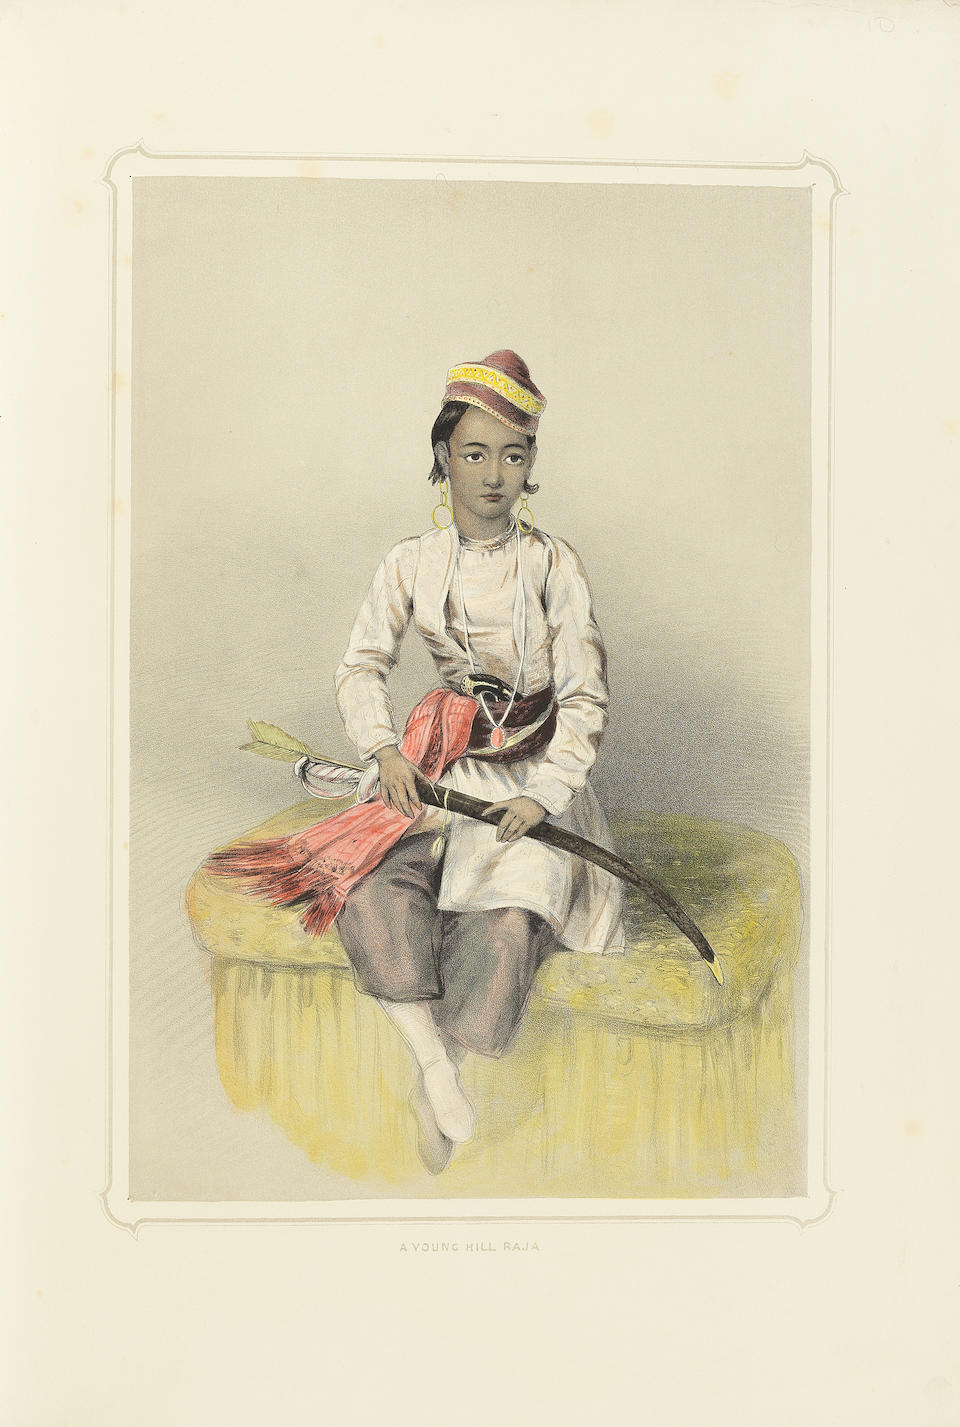 Emily Eden, Portraits of the Princes and People of India, with 28 hand-coloured lithographed plates London, 1844